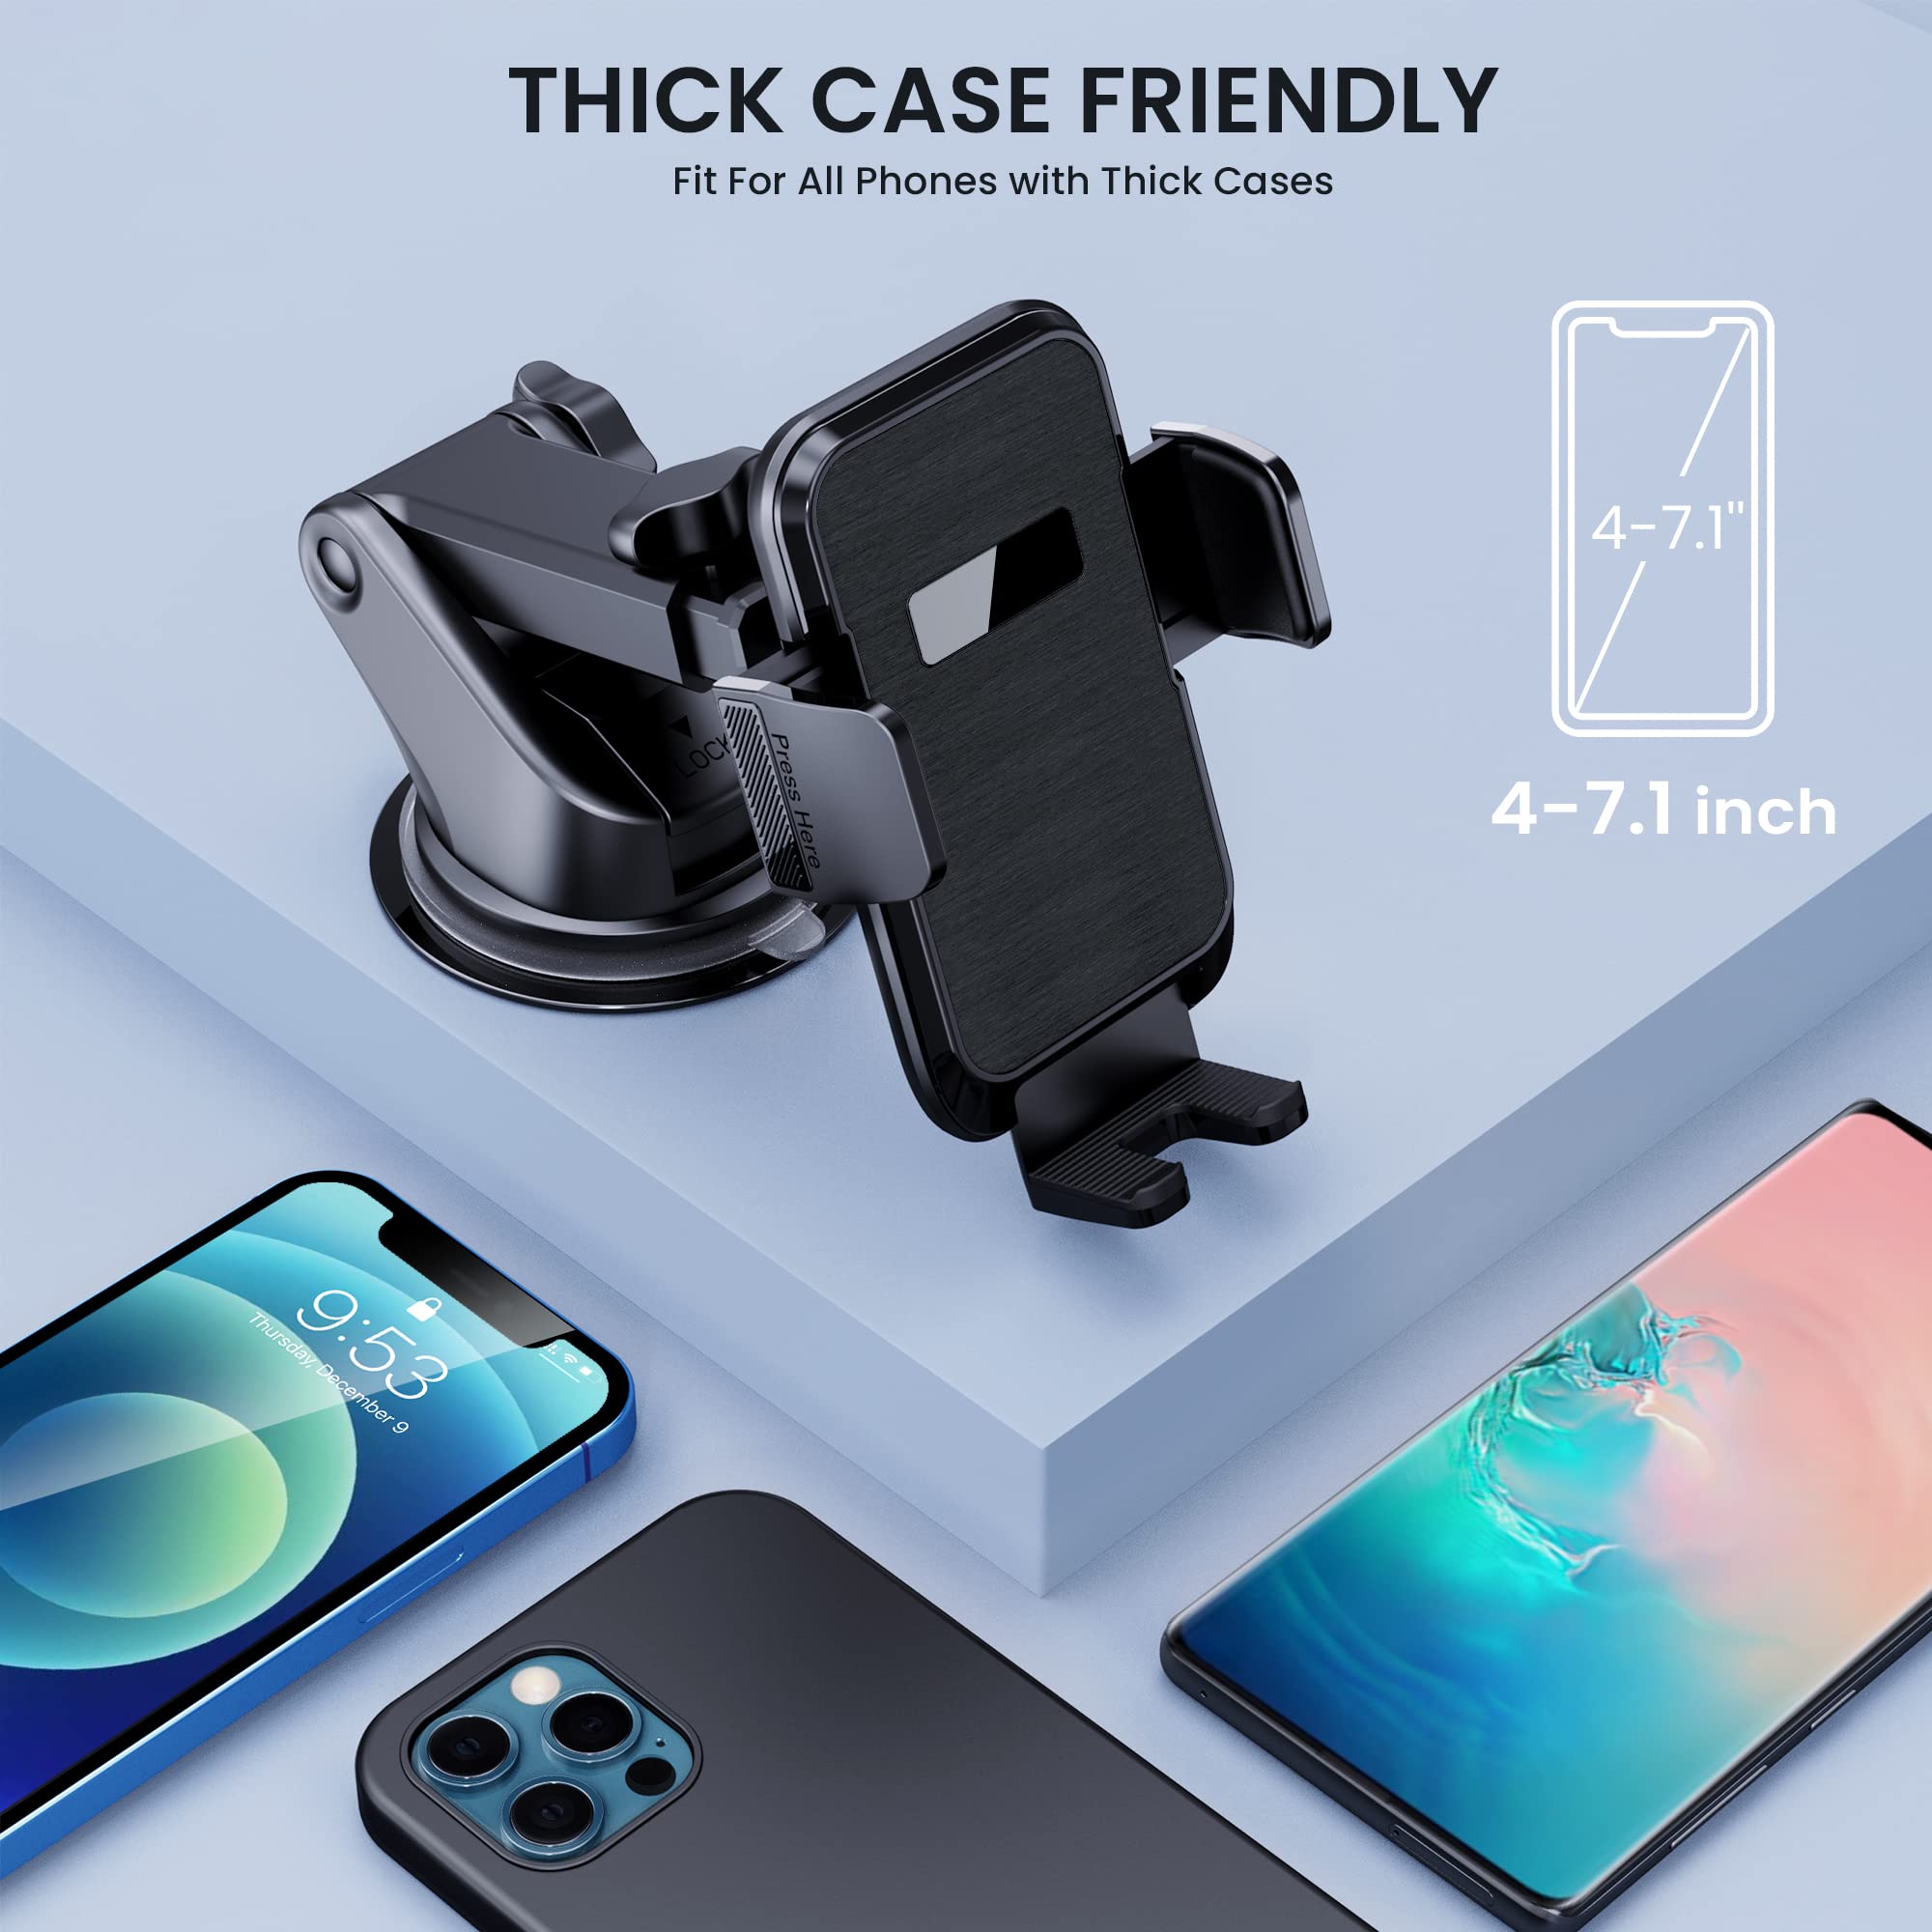 Phone Mount for Car Phone Mount [Military-Grade Super Suction] Phone Holder Car Mount for iPhone Automobile Cell Phone Accessories For Dashboard Windshield Air Vent Fit All iPhone Android Smartphones